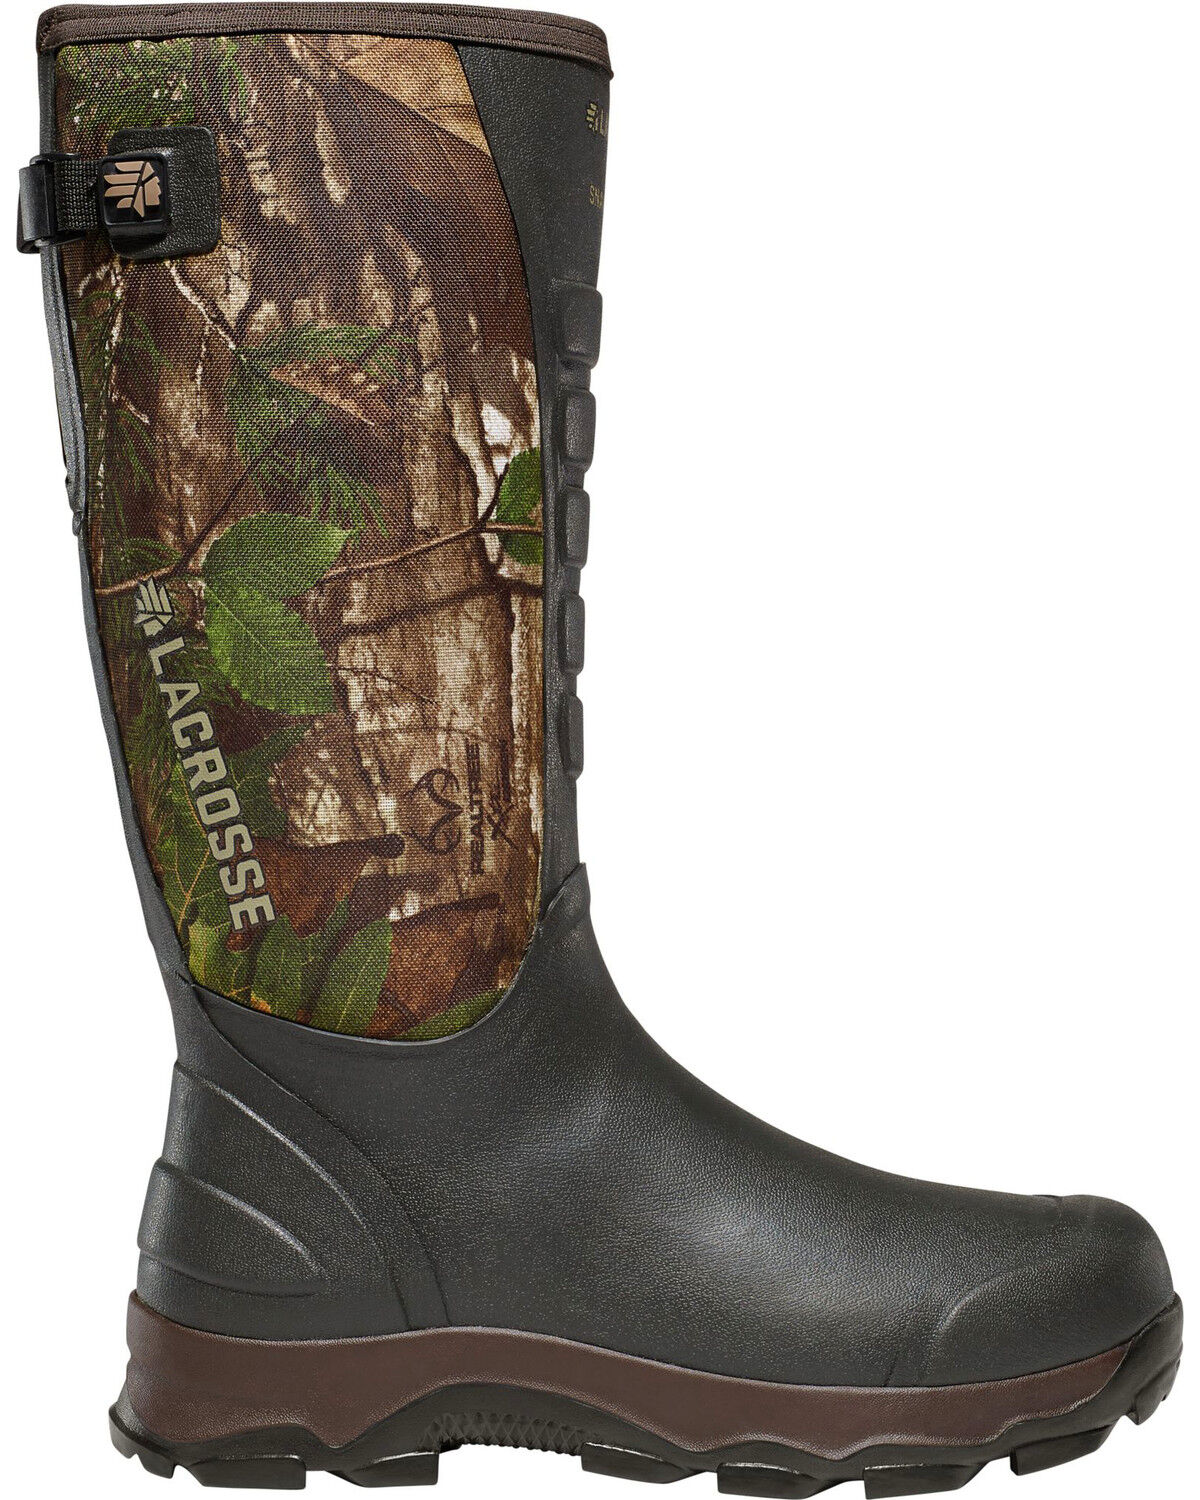 Buy > mens size 15 hunting boots > in stock